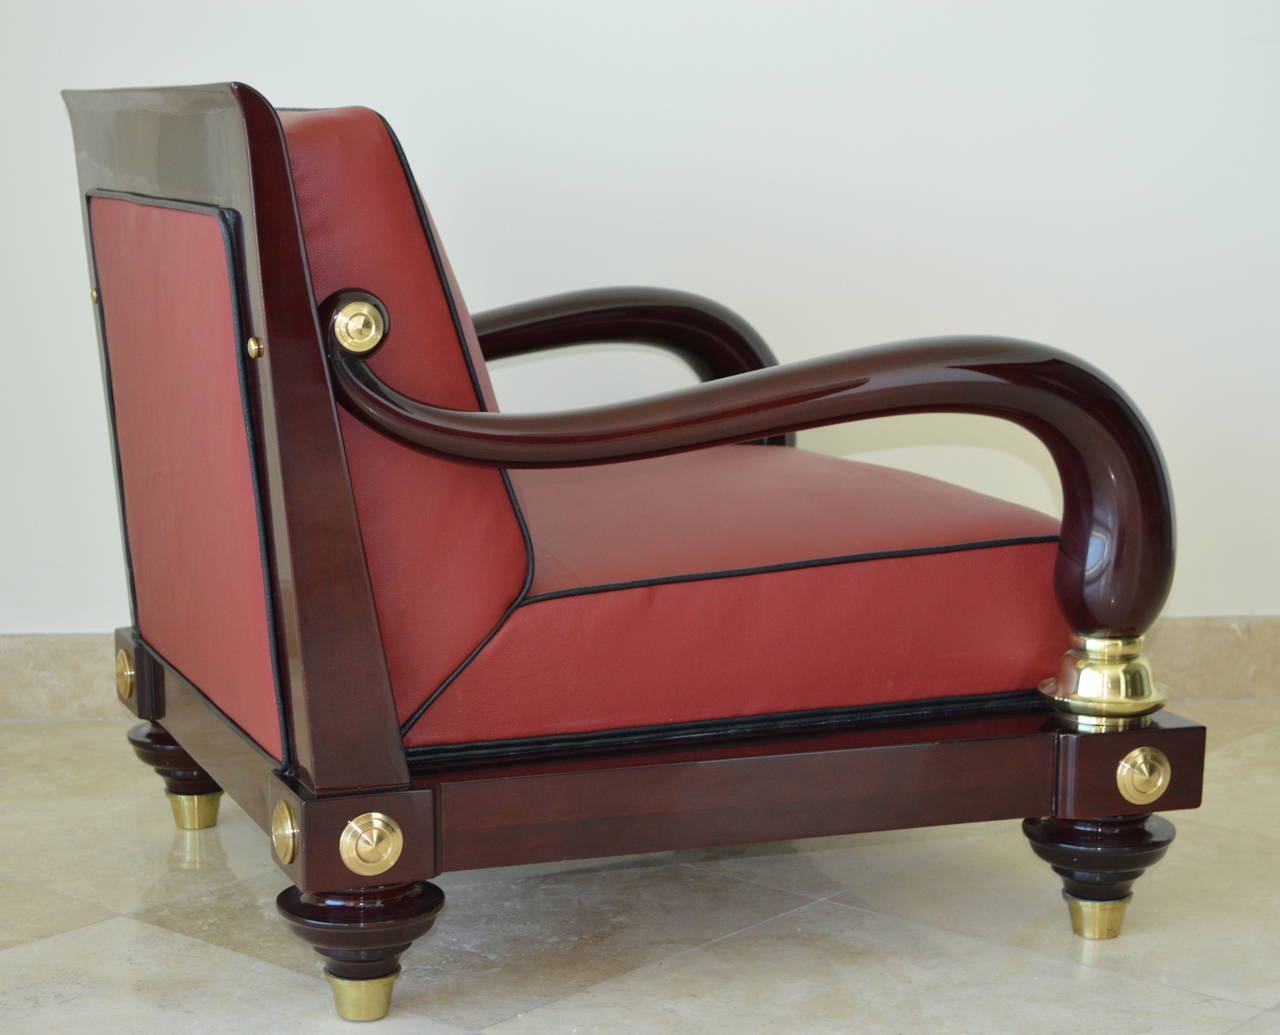 Rare 1950s Octavio Vidales Sculptural Chairs in Lacquered Mahogany and Leather For Sale 1